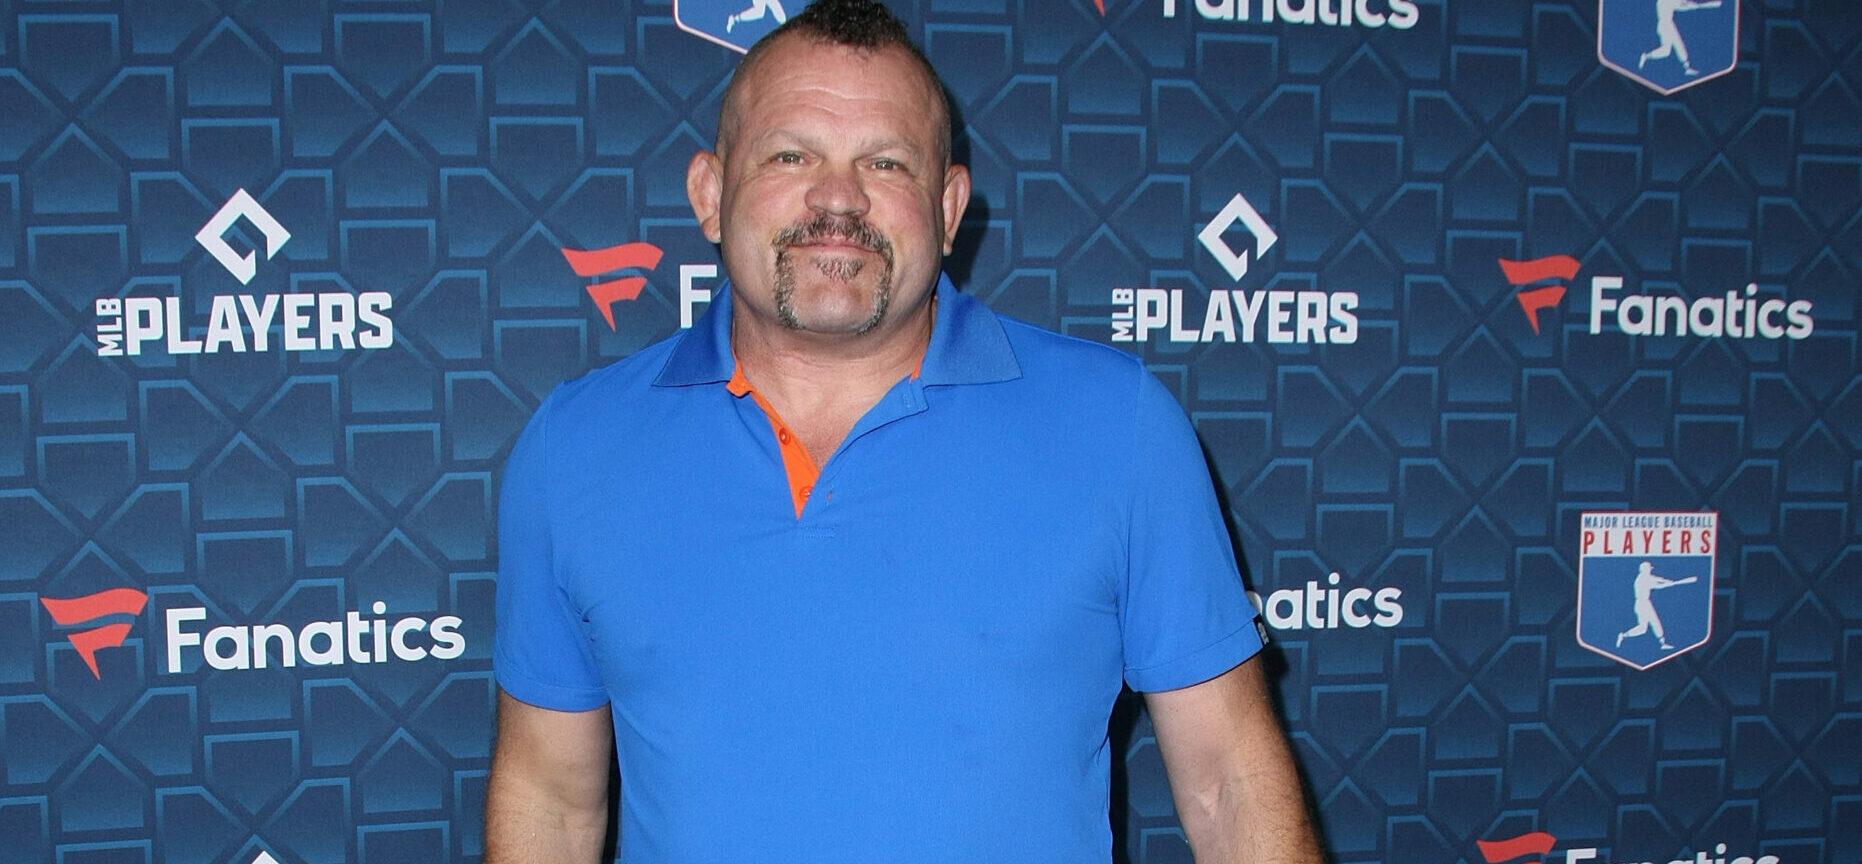 'UFC' Star Chuck Liddell's Ex-Wife Claims He Is Suffering From 'Traumatic Brain' Injury